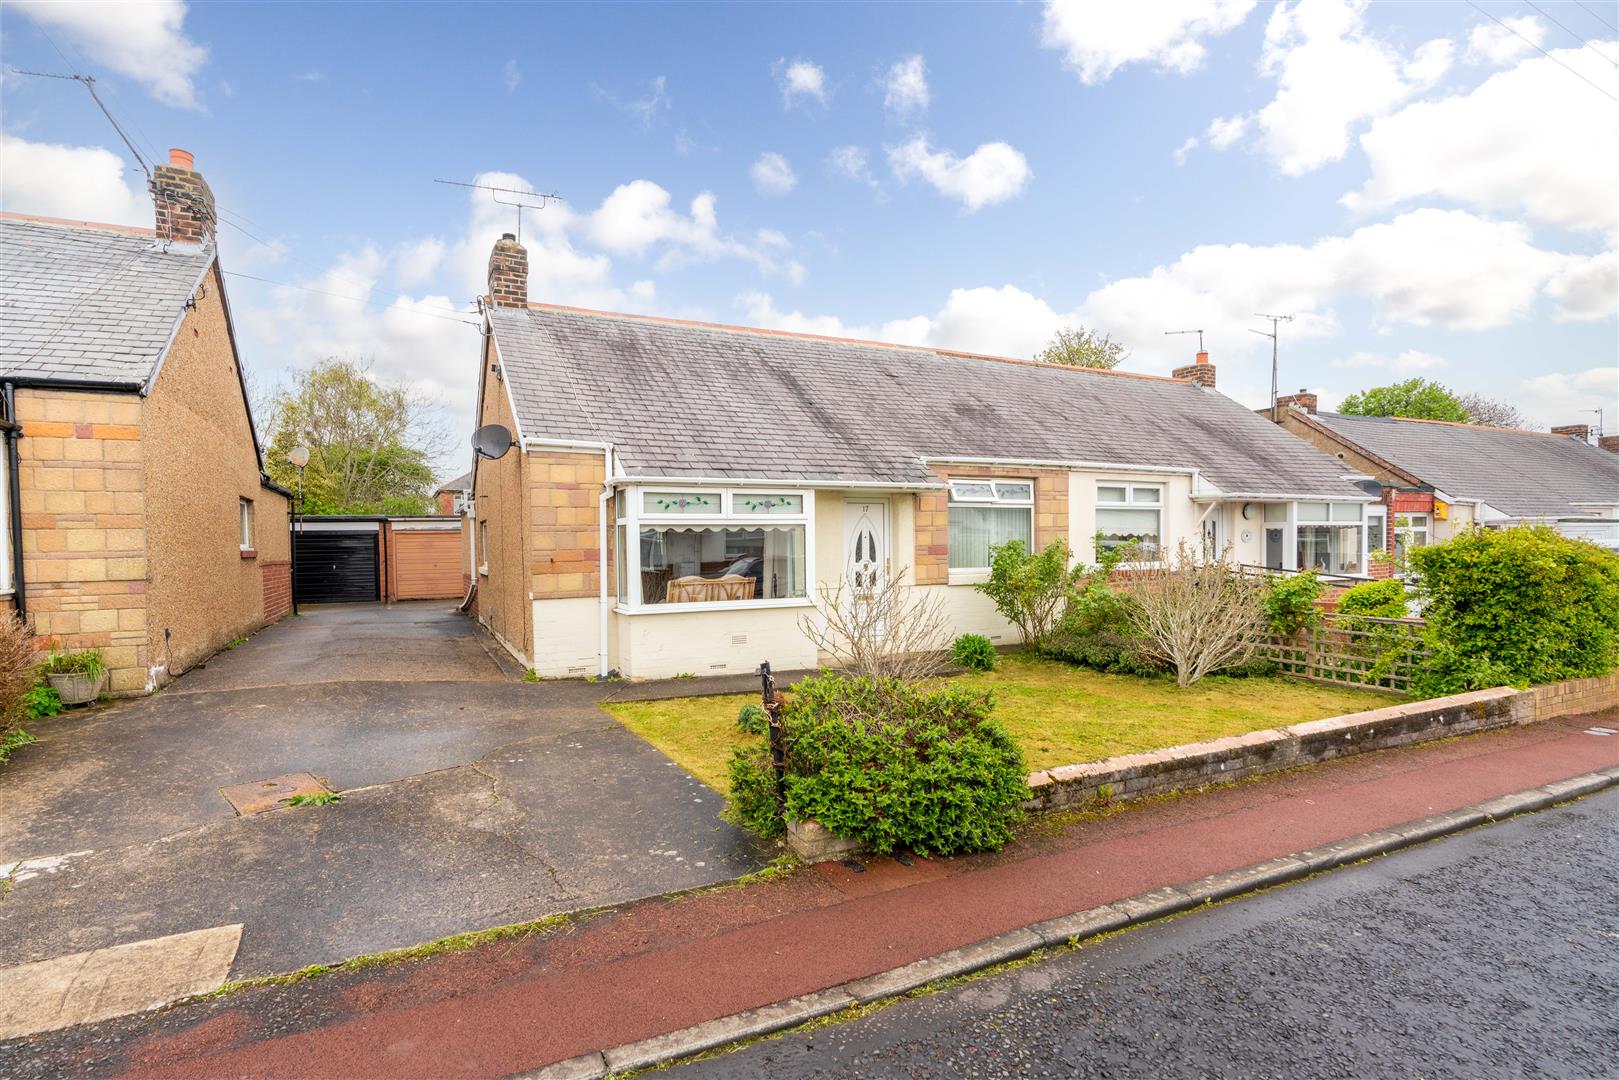 2 bed semi-detached bungalow for sale in Brunton Avenue, Fawdon  - Property Image 1